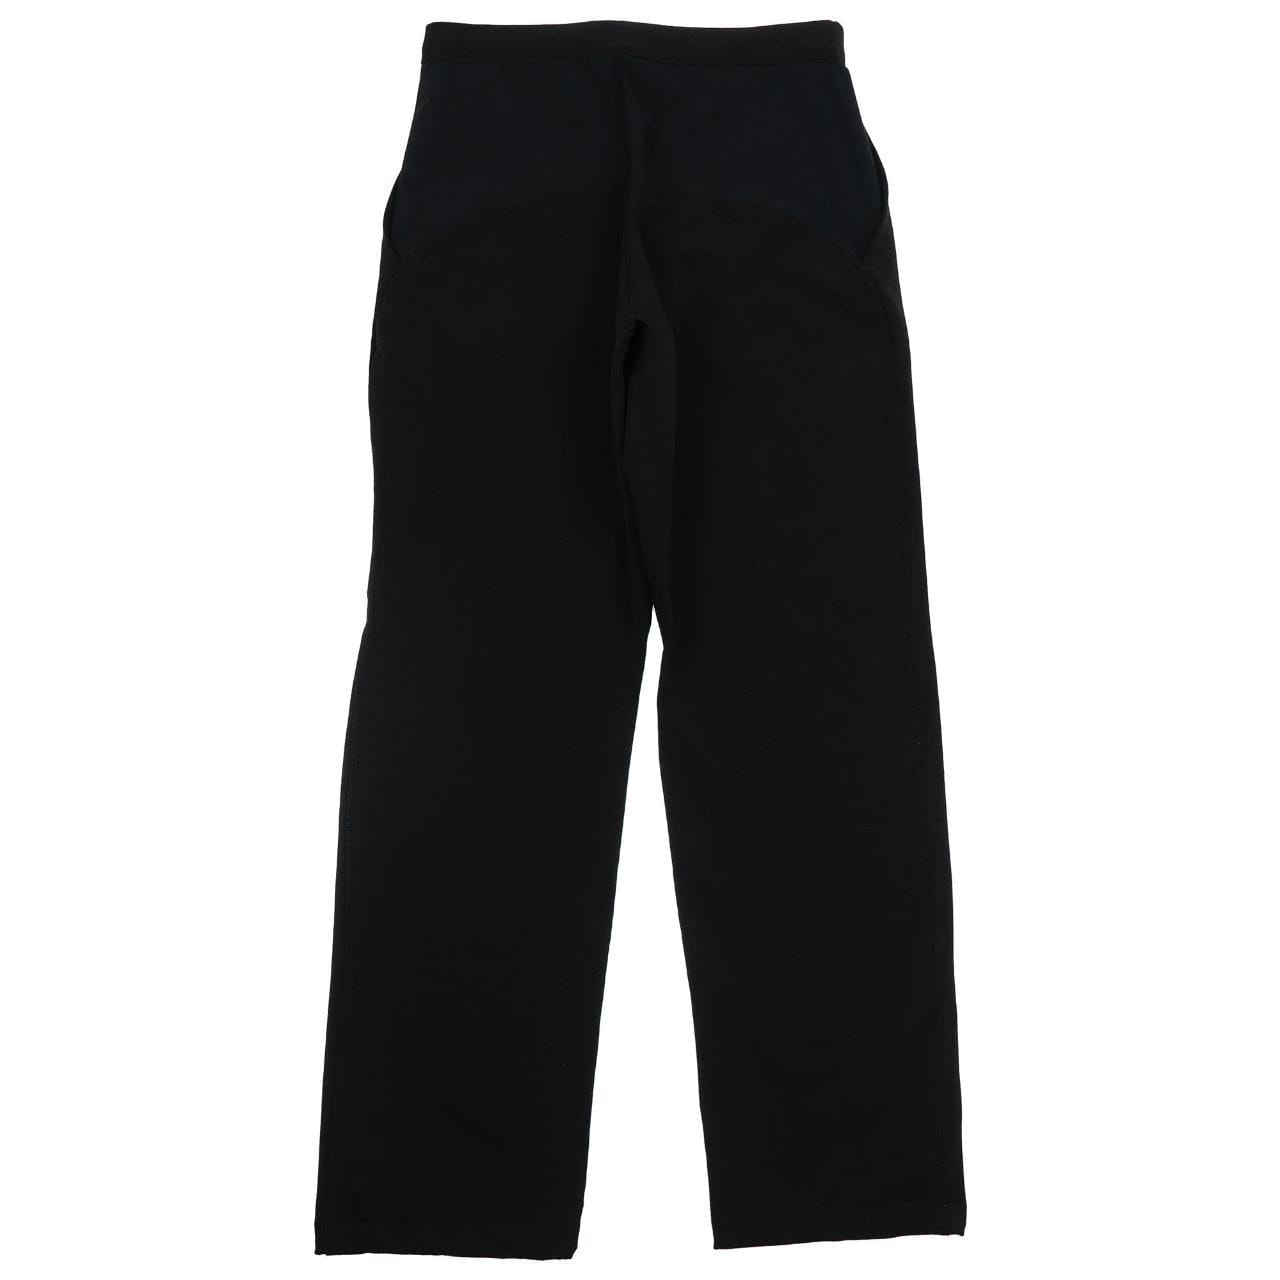 SOFT SHELL PANTS (WOMEN) – Baffin - Born in the North '79